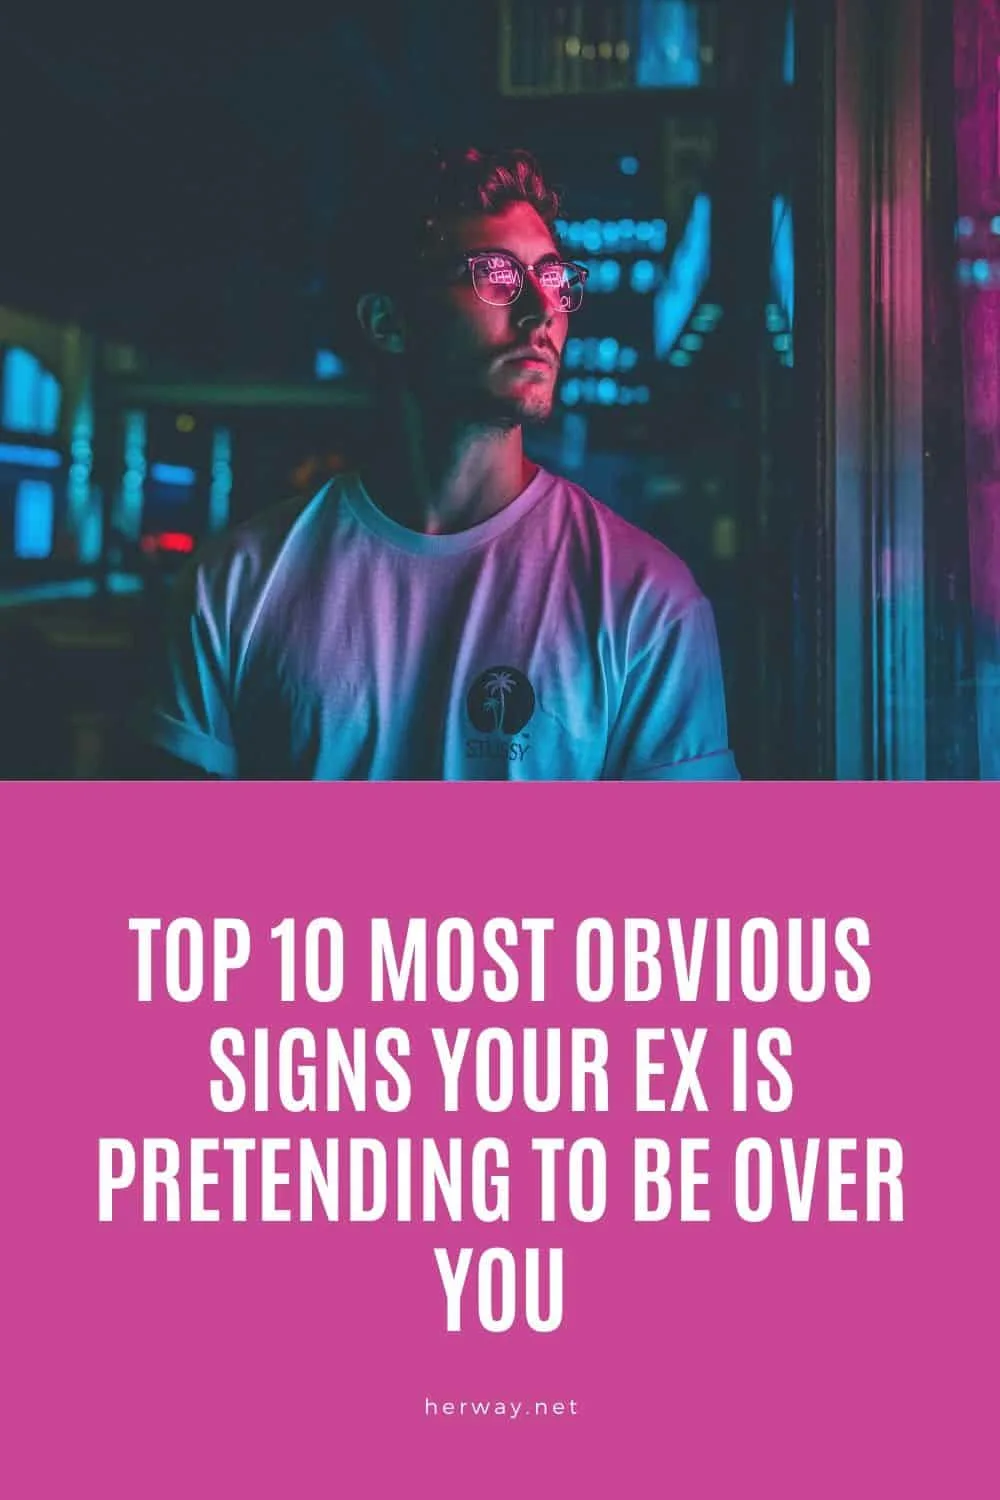 Top 10 Most Obvious Signs Your Ex Is Pretending To Be Over You